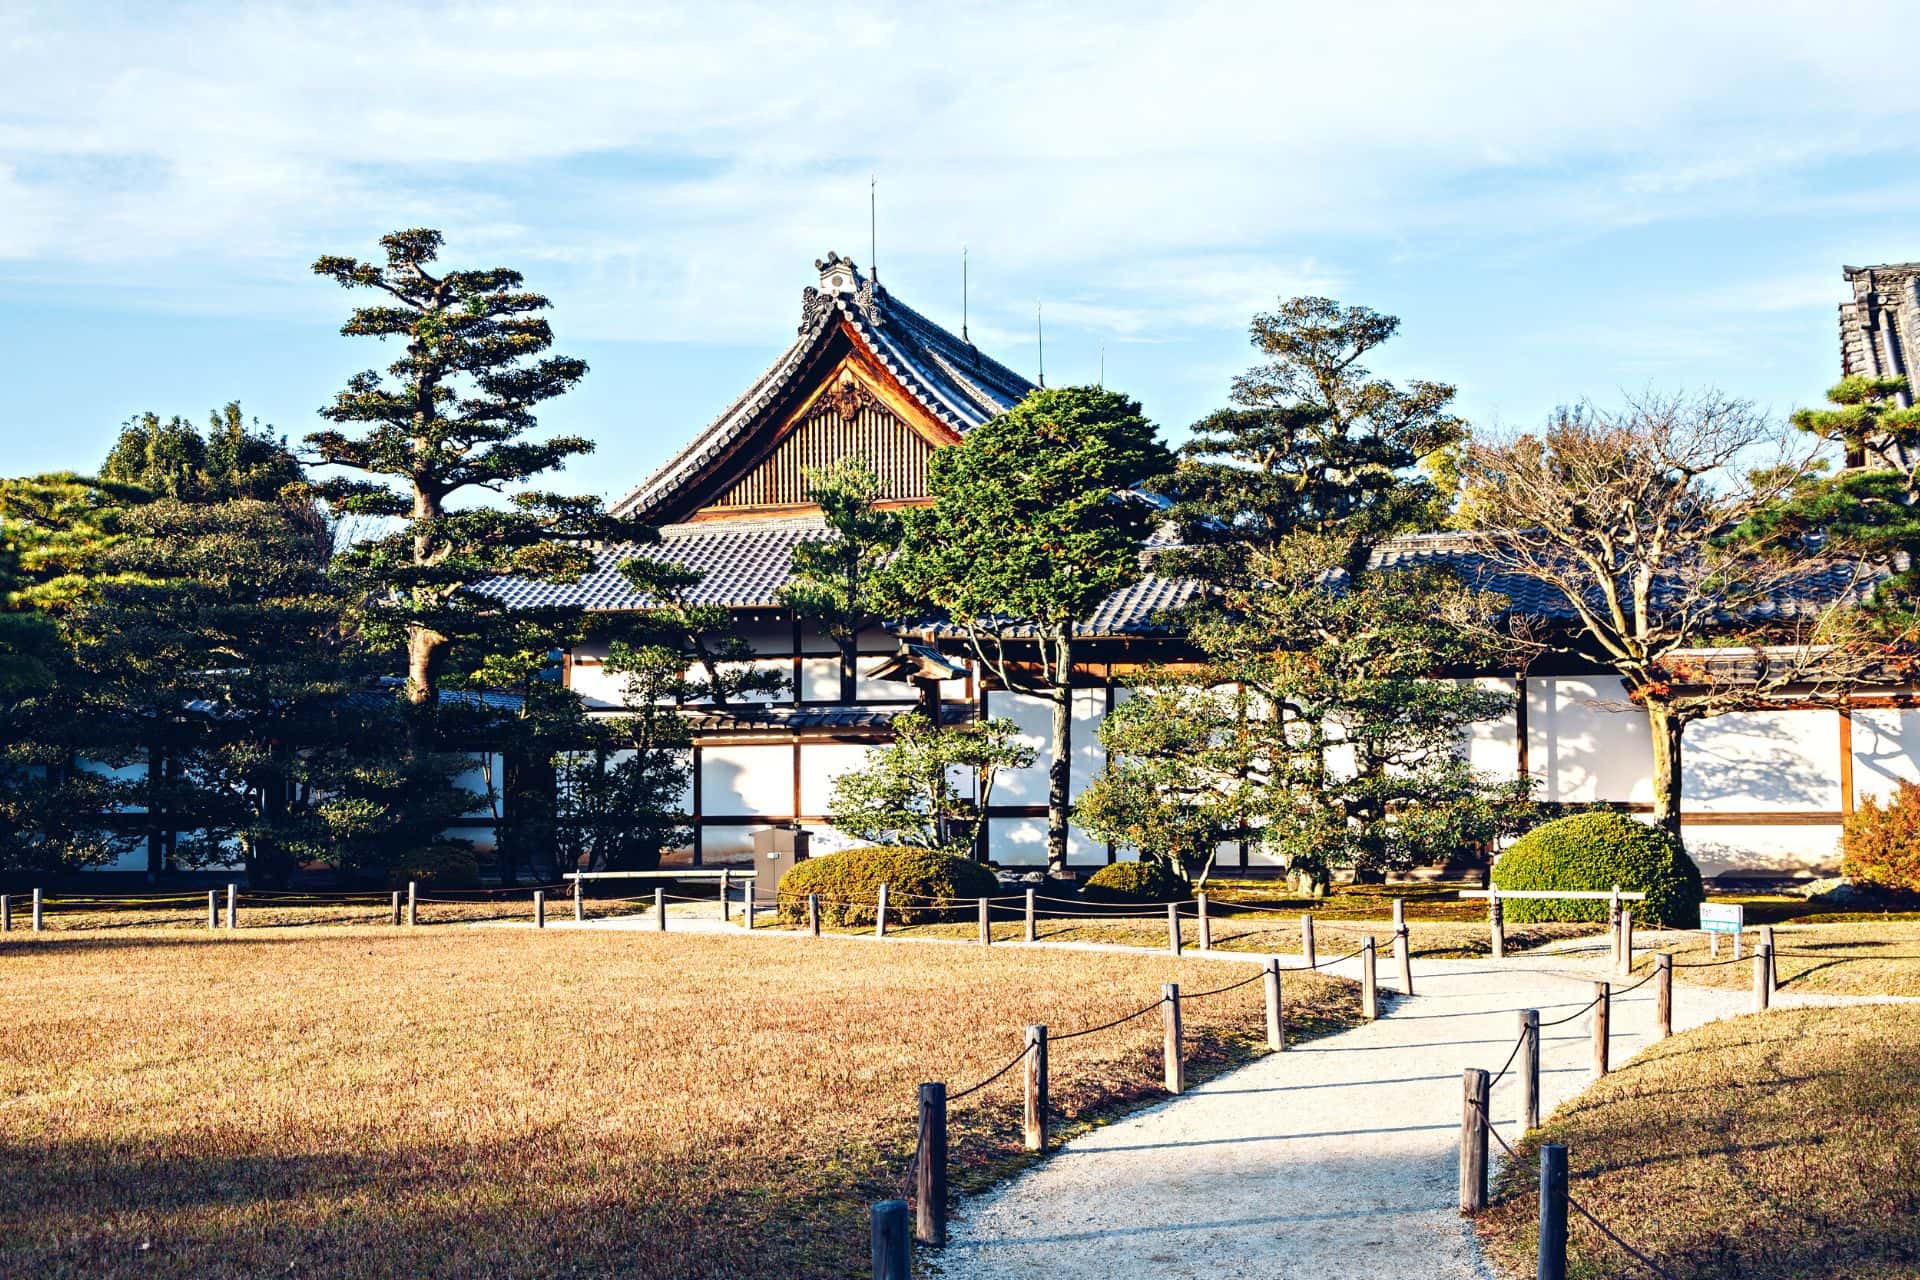 What to See at Nijo Castle